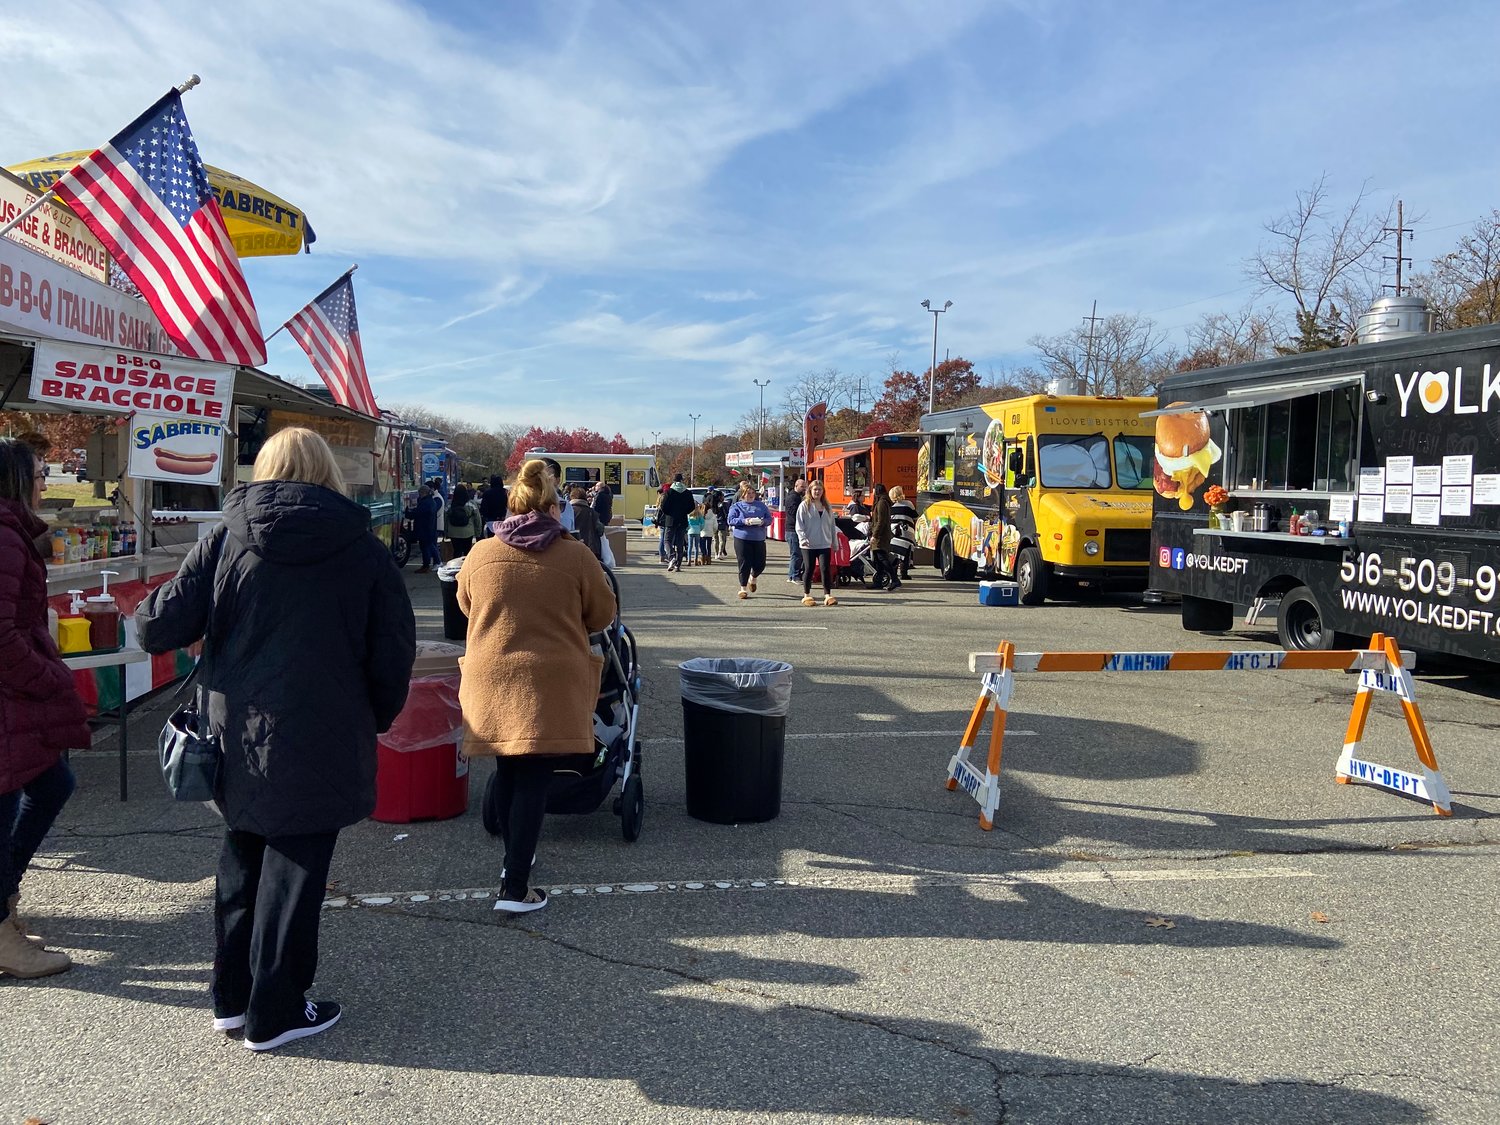 Food trucks lined the Seaford Long Island Rail Road station parking lot at the fair, which was open until 8 p.m.